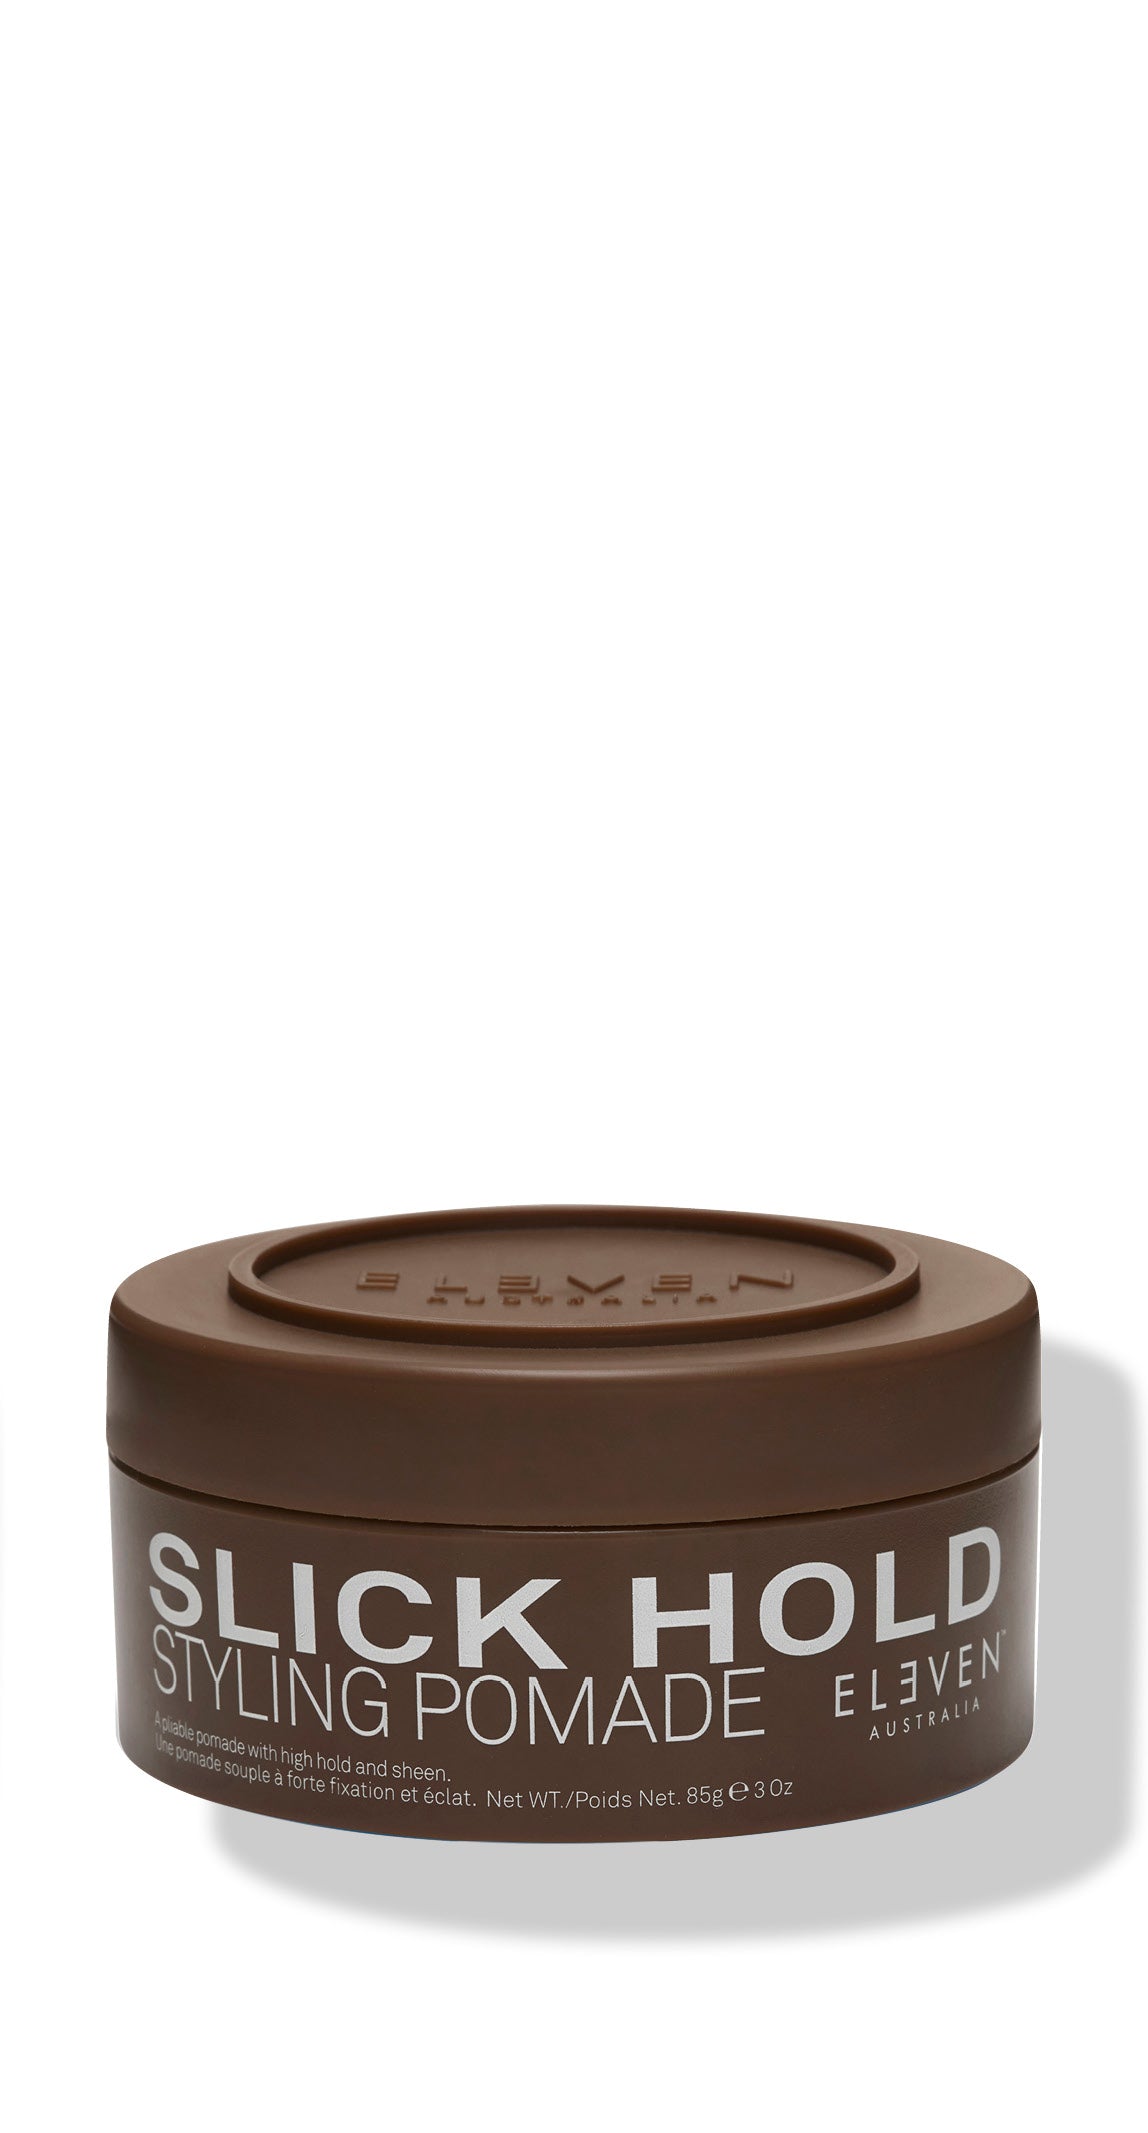 ELEVEN Hair SLICK HOLD STYLING POMADE is the go-to product for anyone after a wet or high shine look